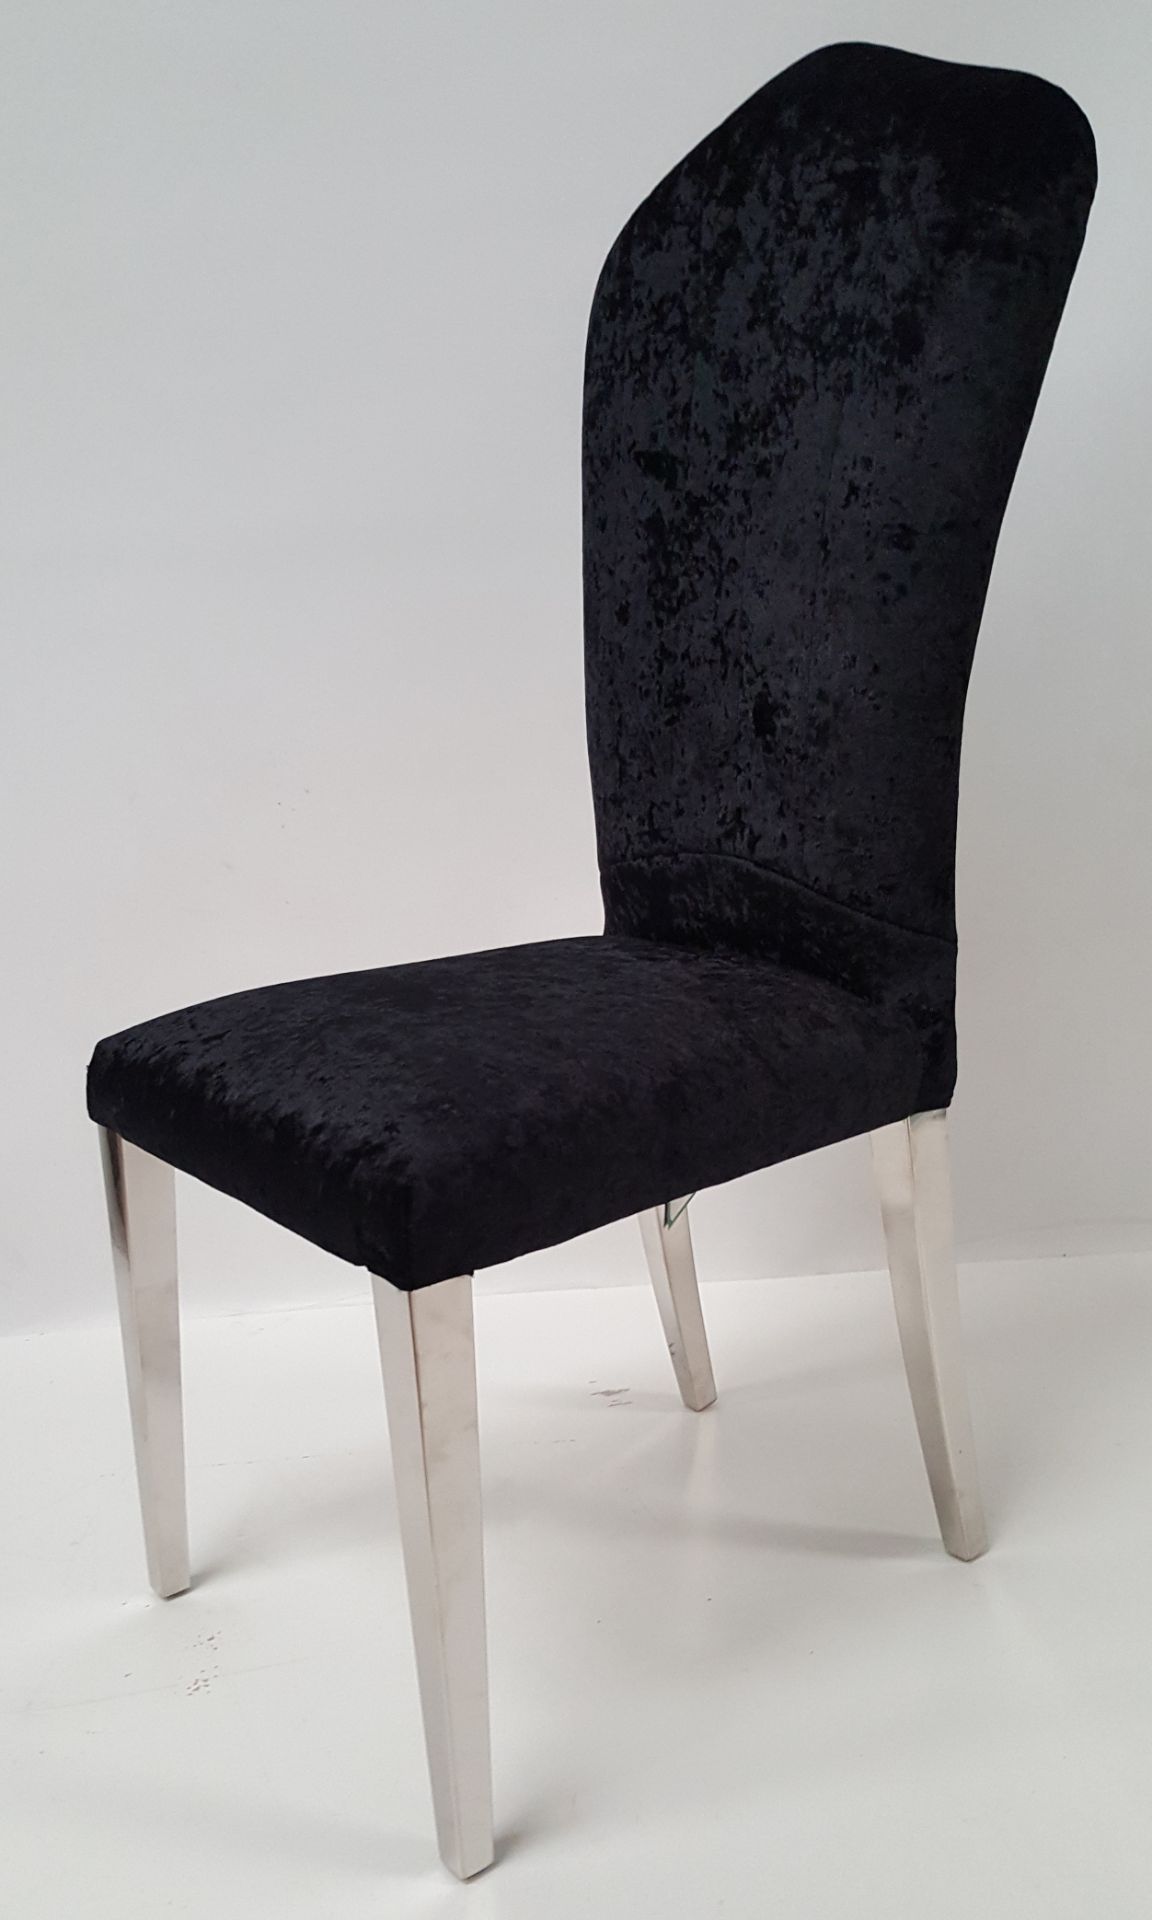 6 x STYLISH BLACK CRUSHED VELVET DINING TABLE CHAIRS - CL408 - Location: Altrincham WA14 - Image 4 of 6